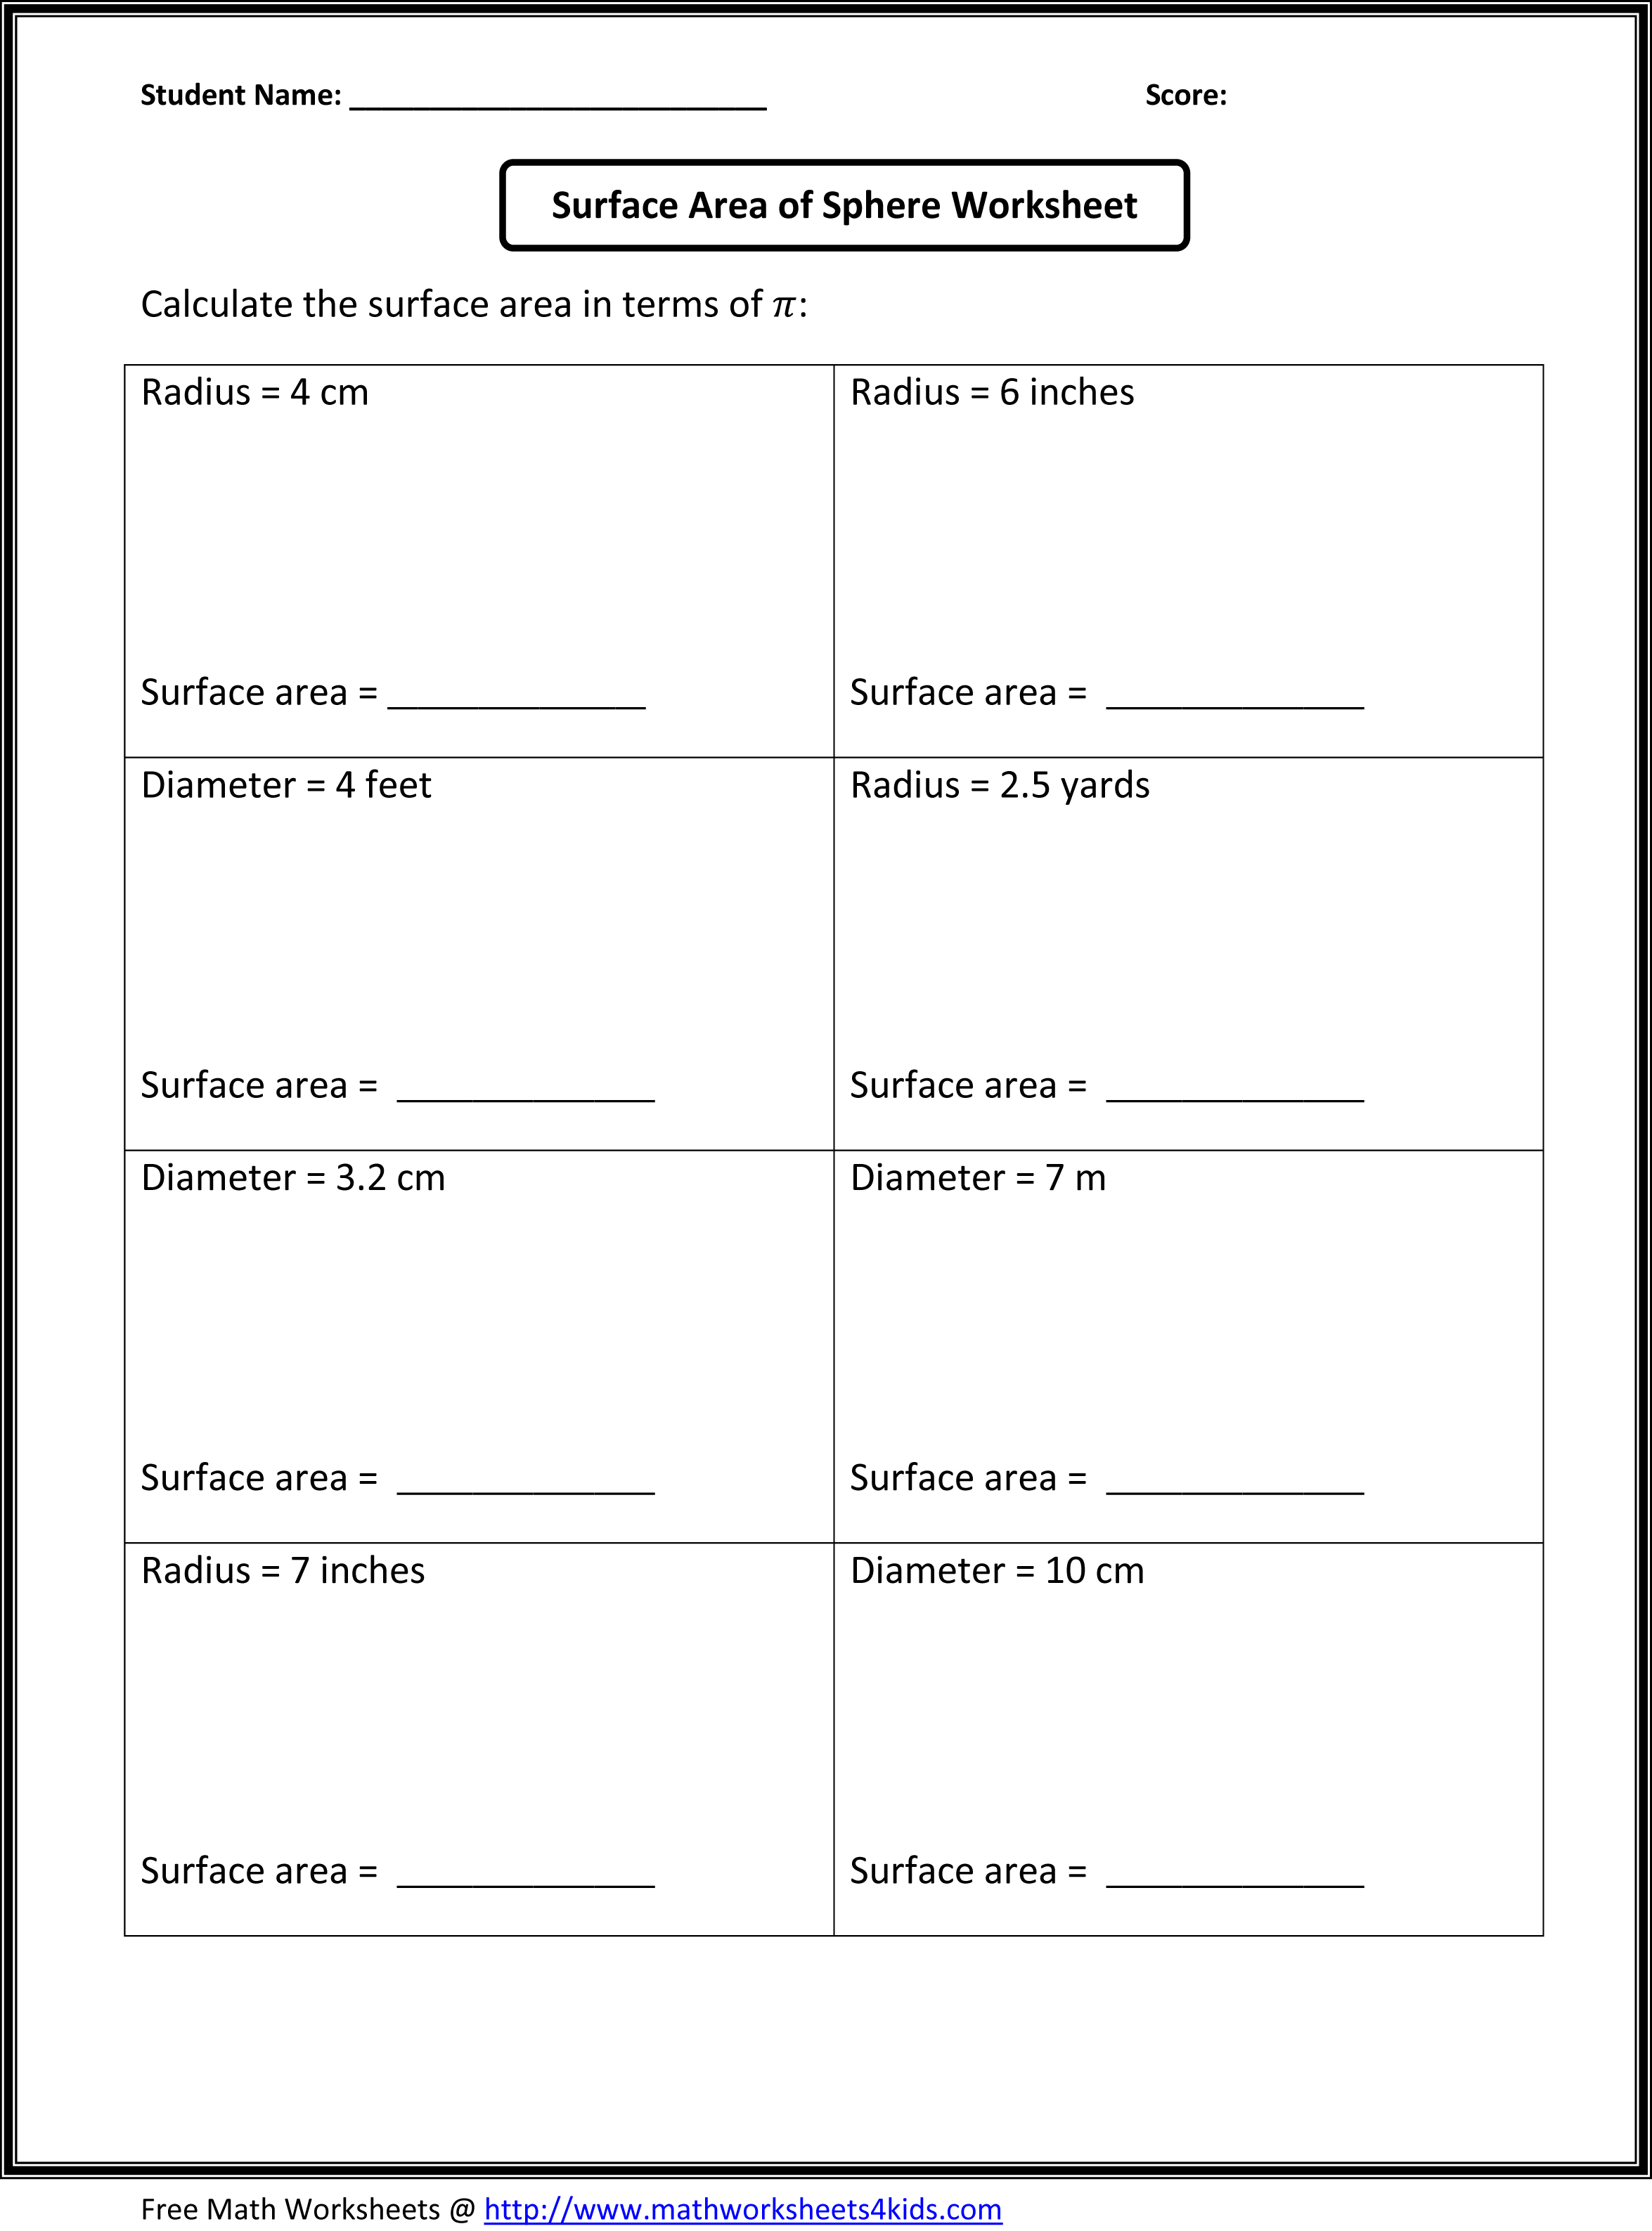 14 Best Images of Absolute Value Problems Worksheet - Absolute Value